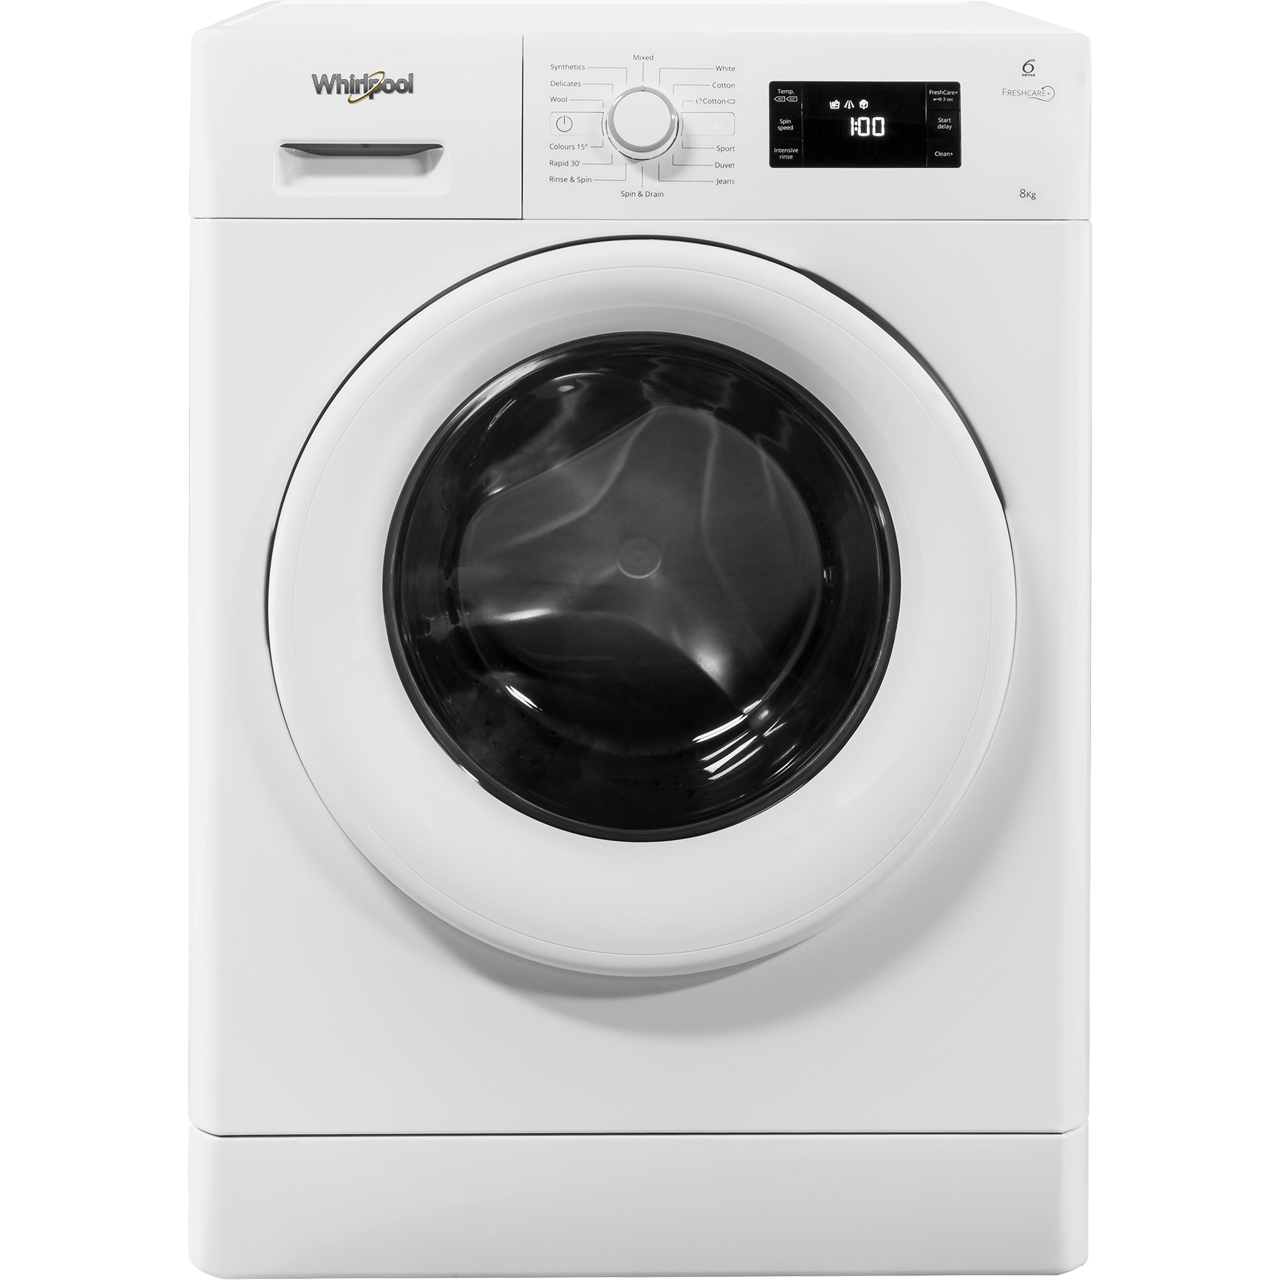 Whirlpool FWG81496W 8Kg Washing Machine with 1400 rpm Review